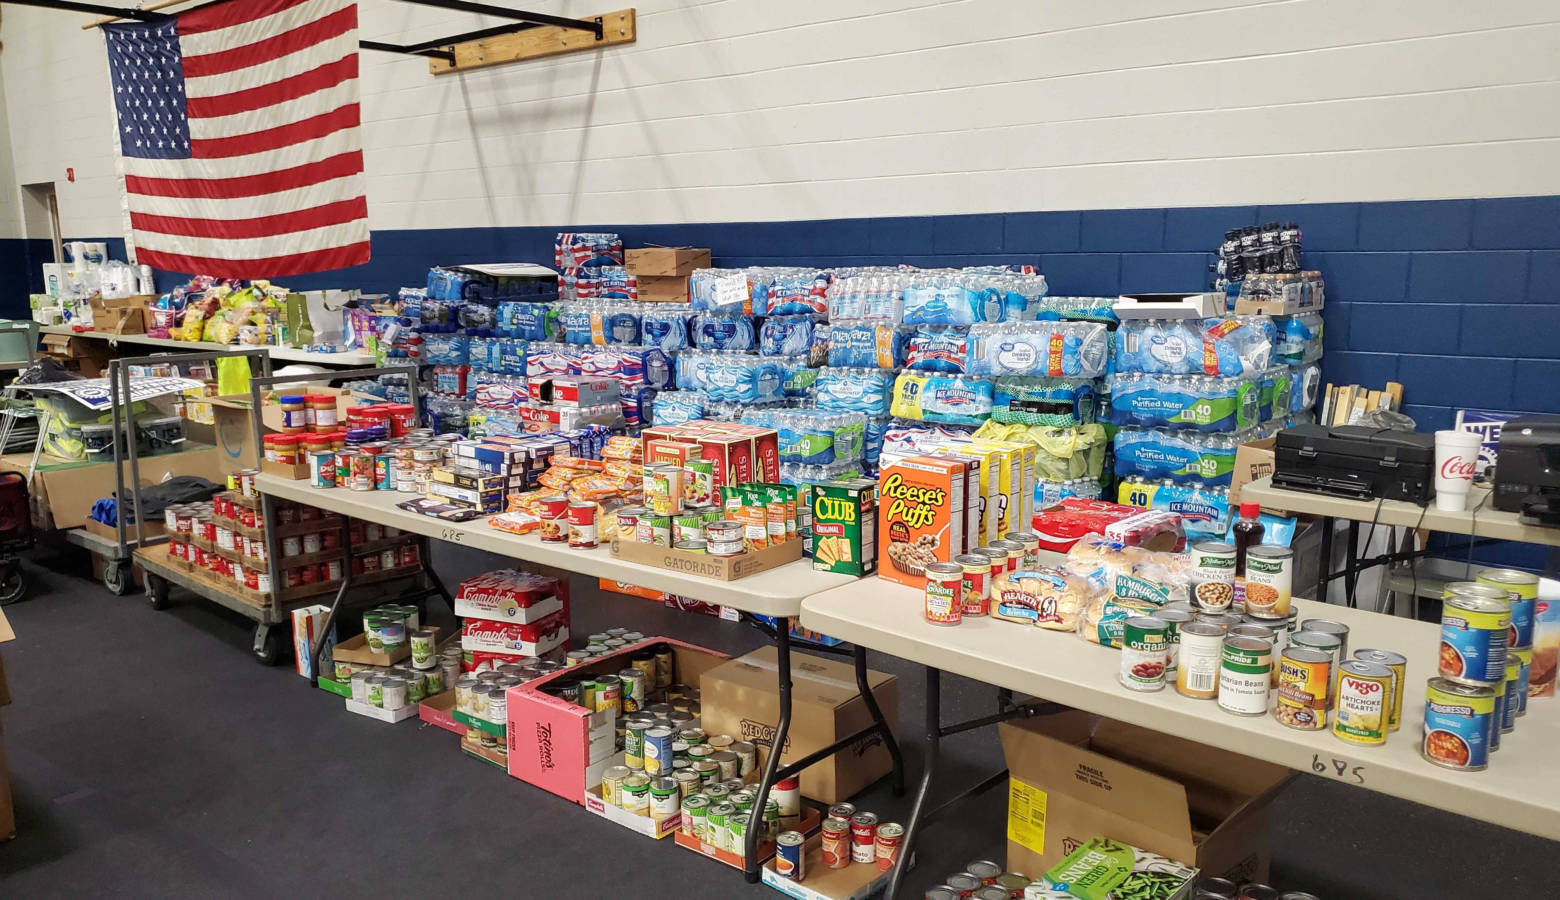 A food pantry is set up in gym of the UAW Local 685 union hall from food donated to help members in need during the strike against General Motors. (Samantha Horton/IPB News)